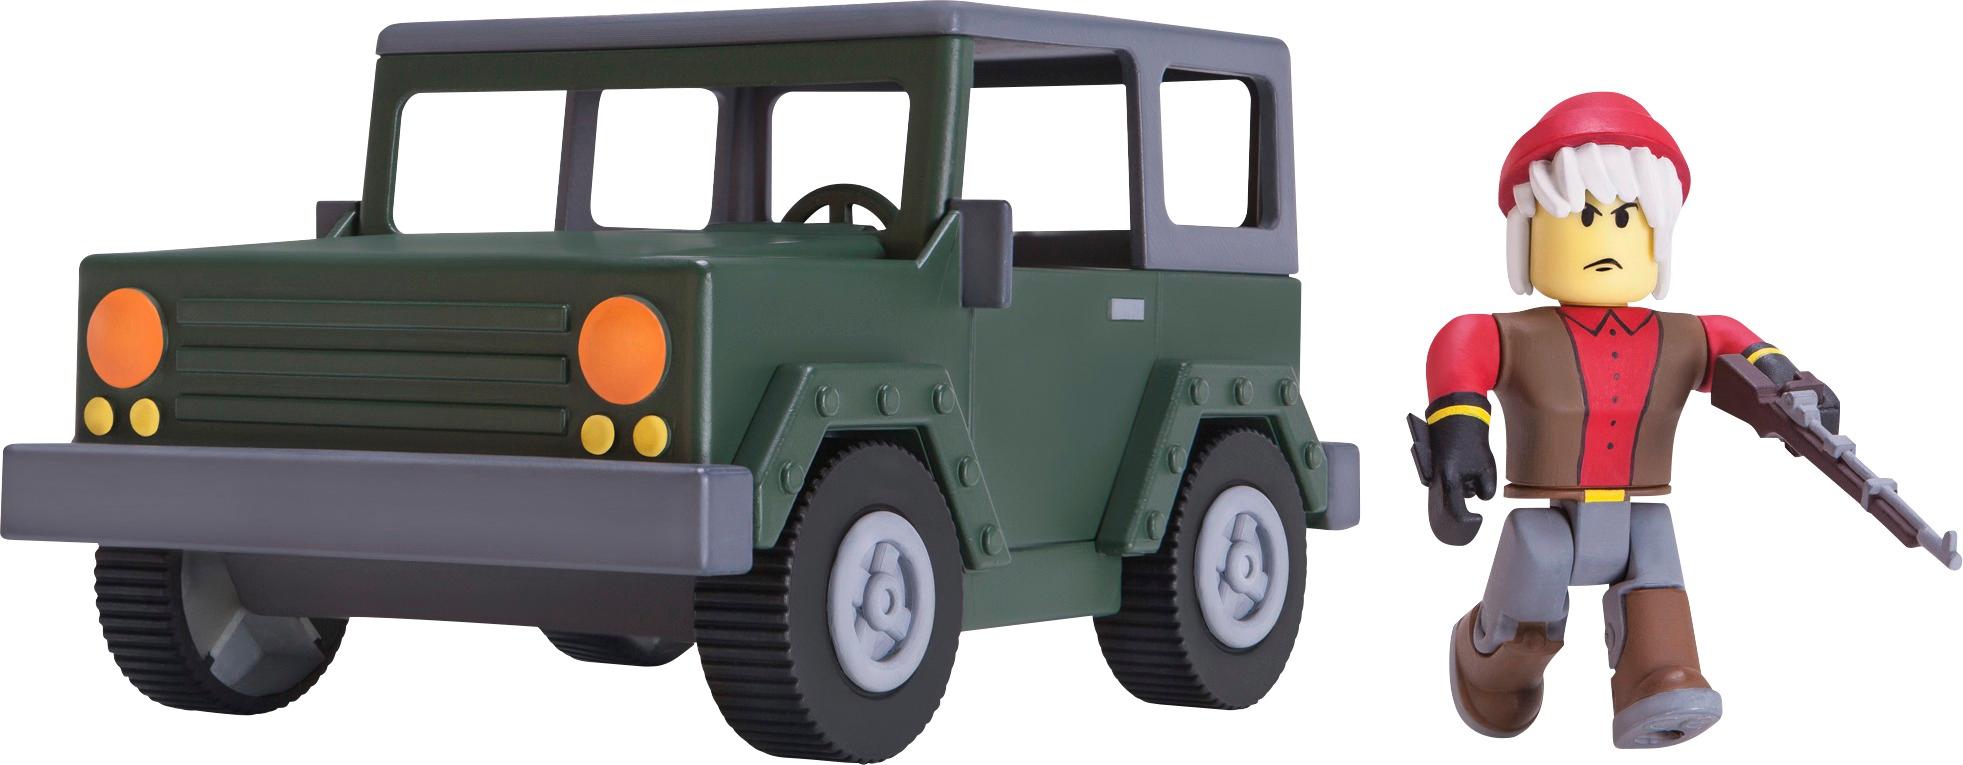 Roblox Large Vehicle Styles May Vary - 